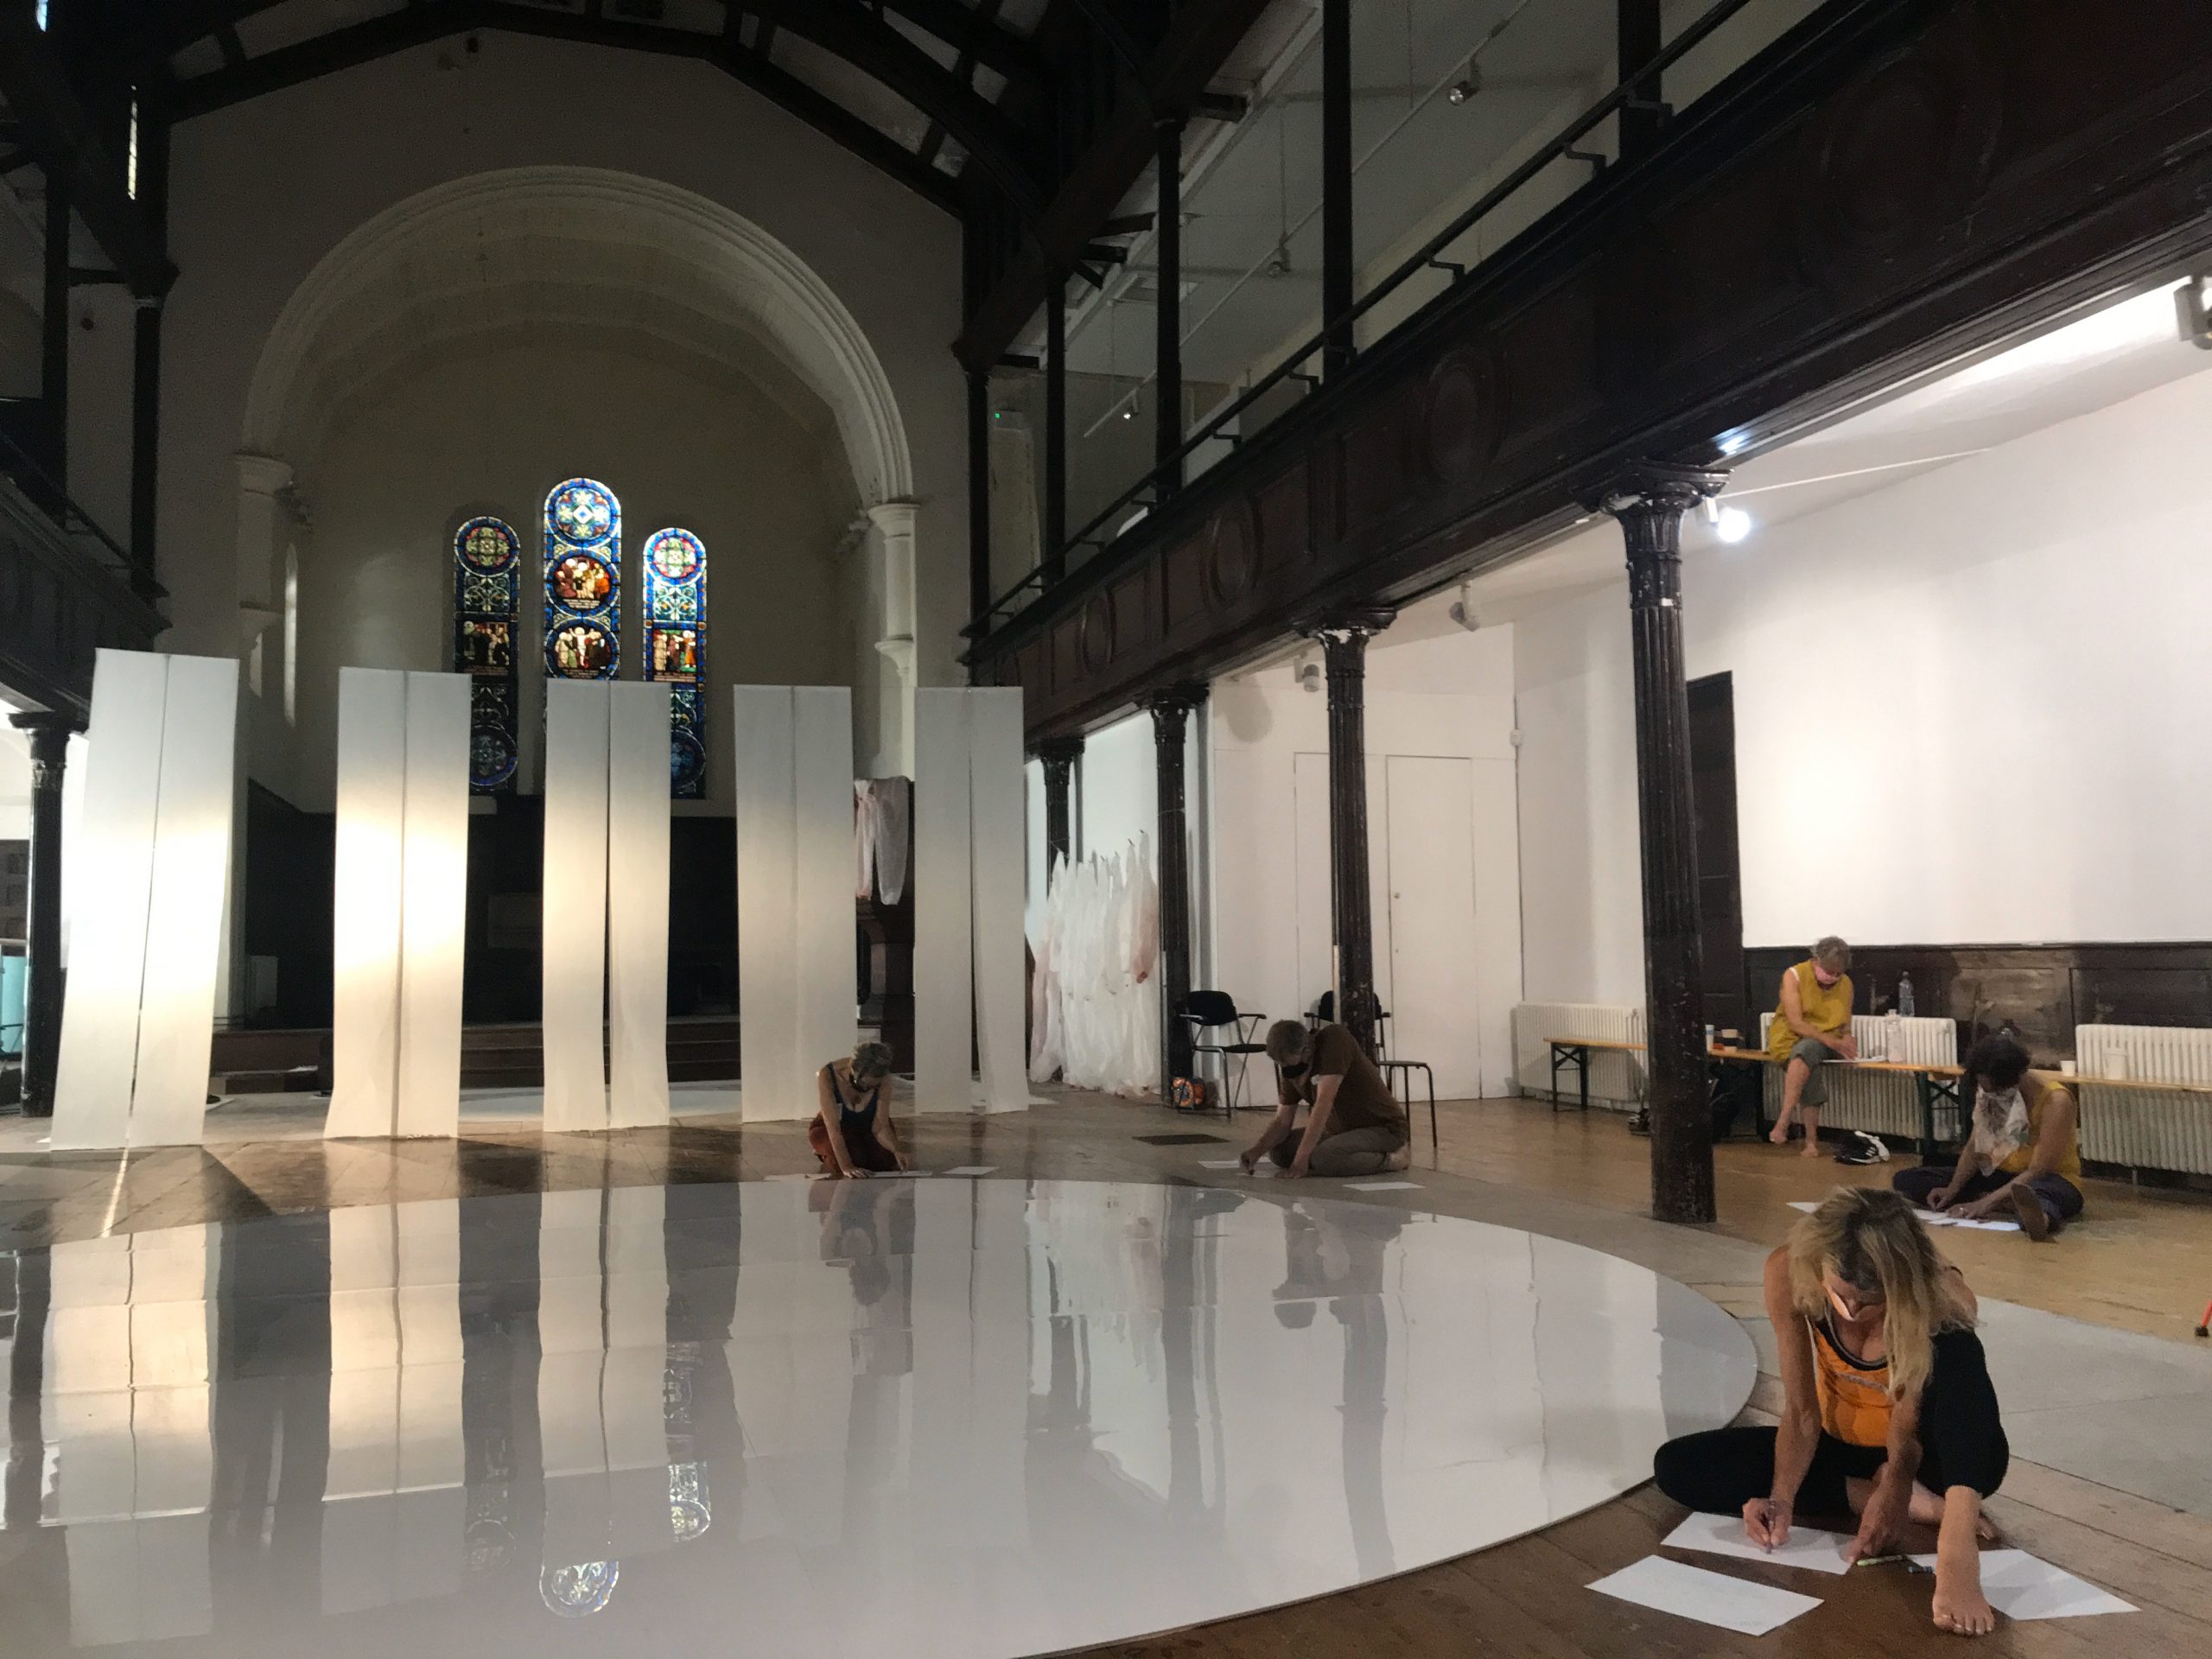 We can see five participant dancers, listening to soundscapes and responding in drawing, in the main gallery space at Fabrica, a former Georgian Church. We can see teh stained glass windows at the back